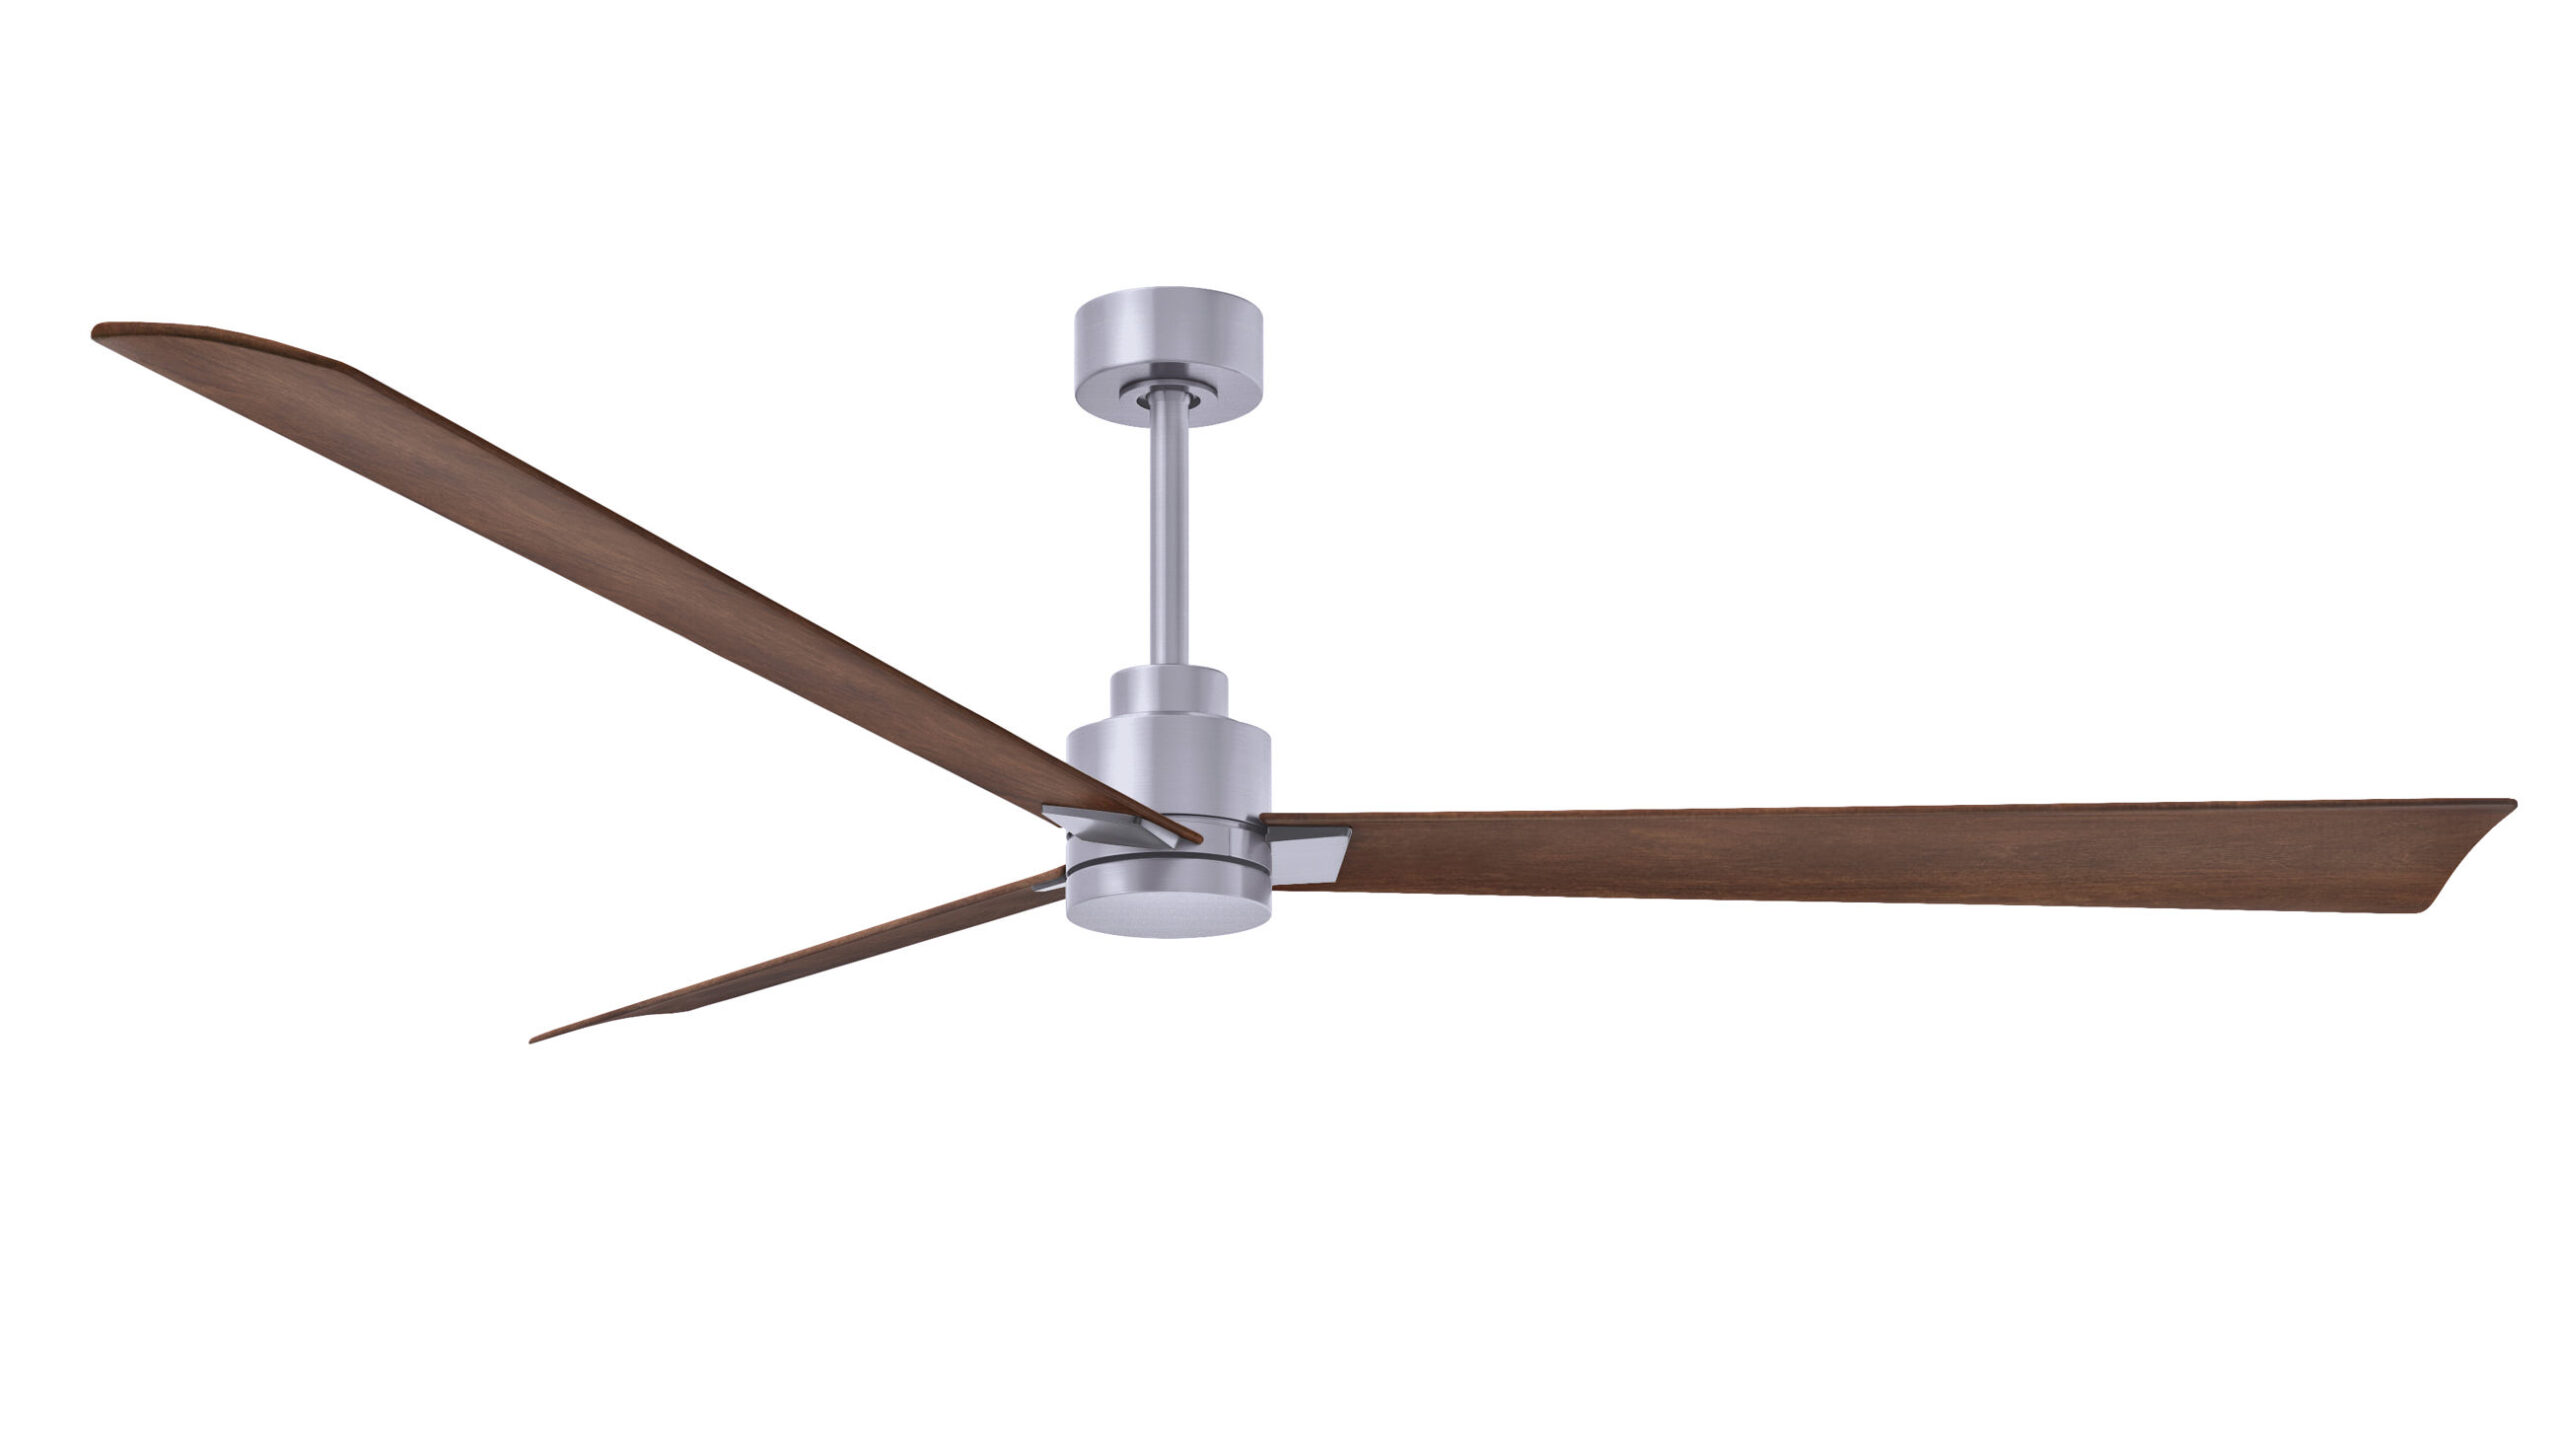 Alessandra ceiling fan in brushed nickel finish with 72